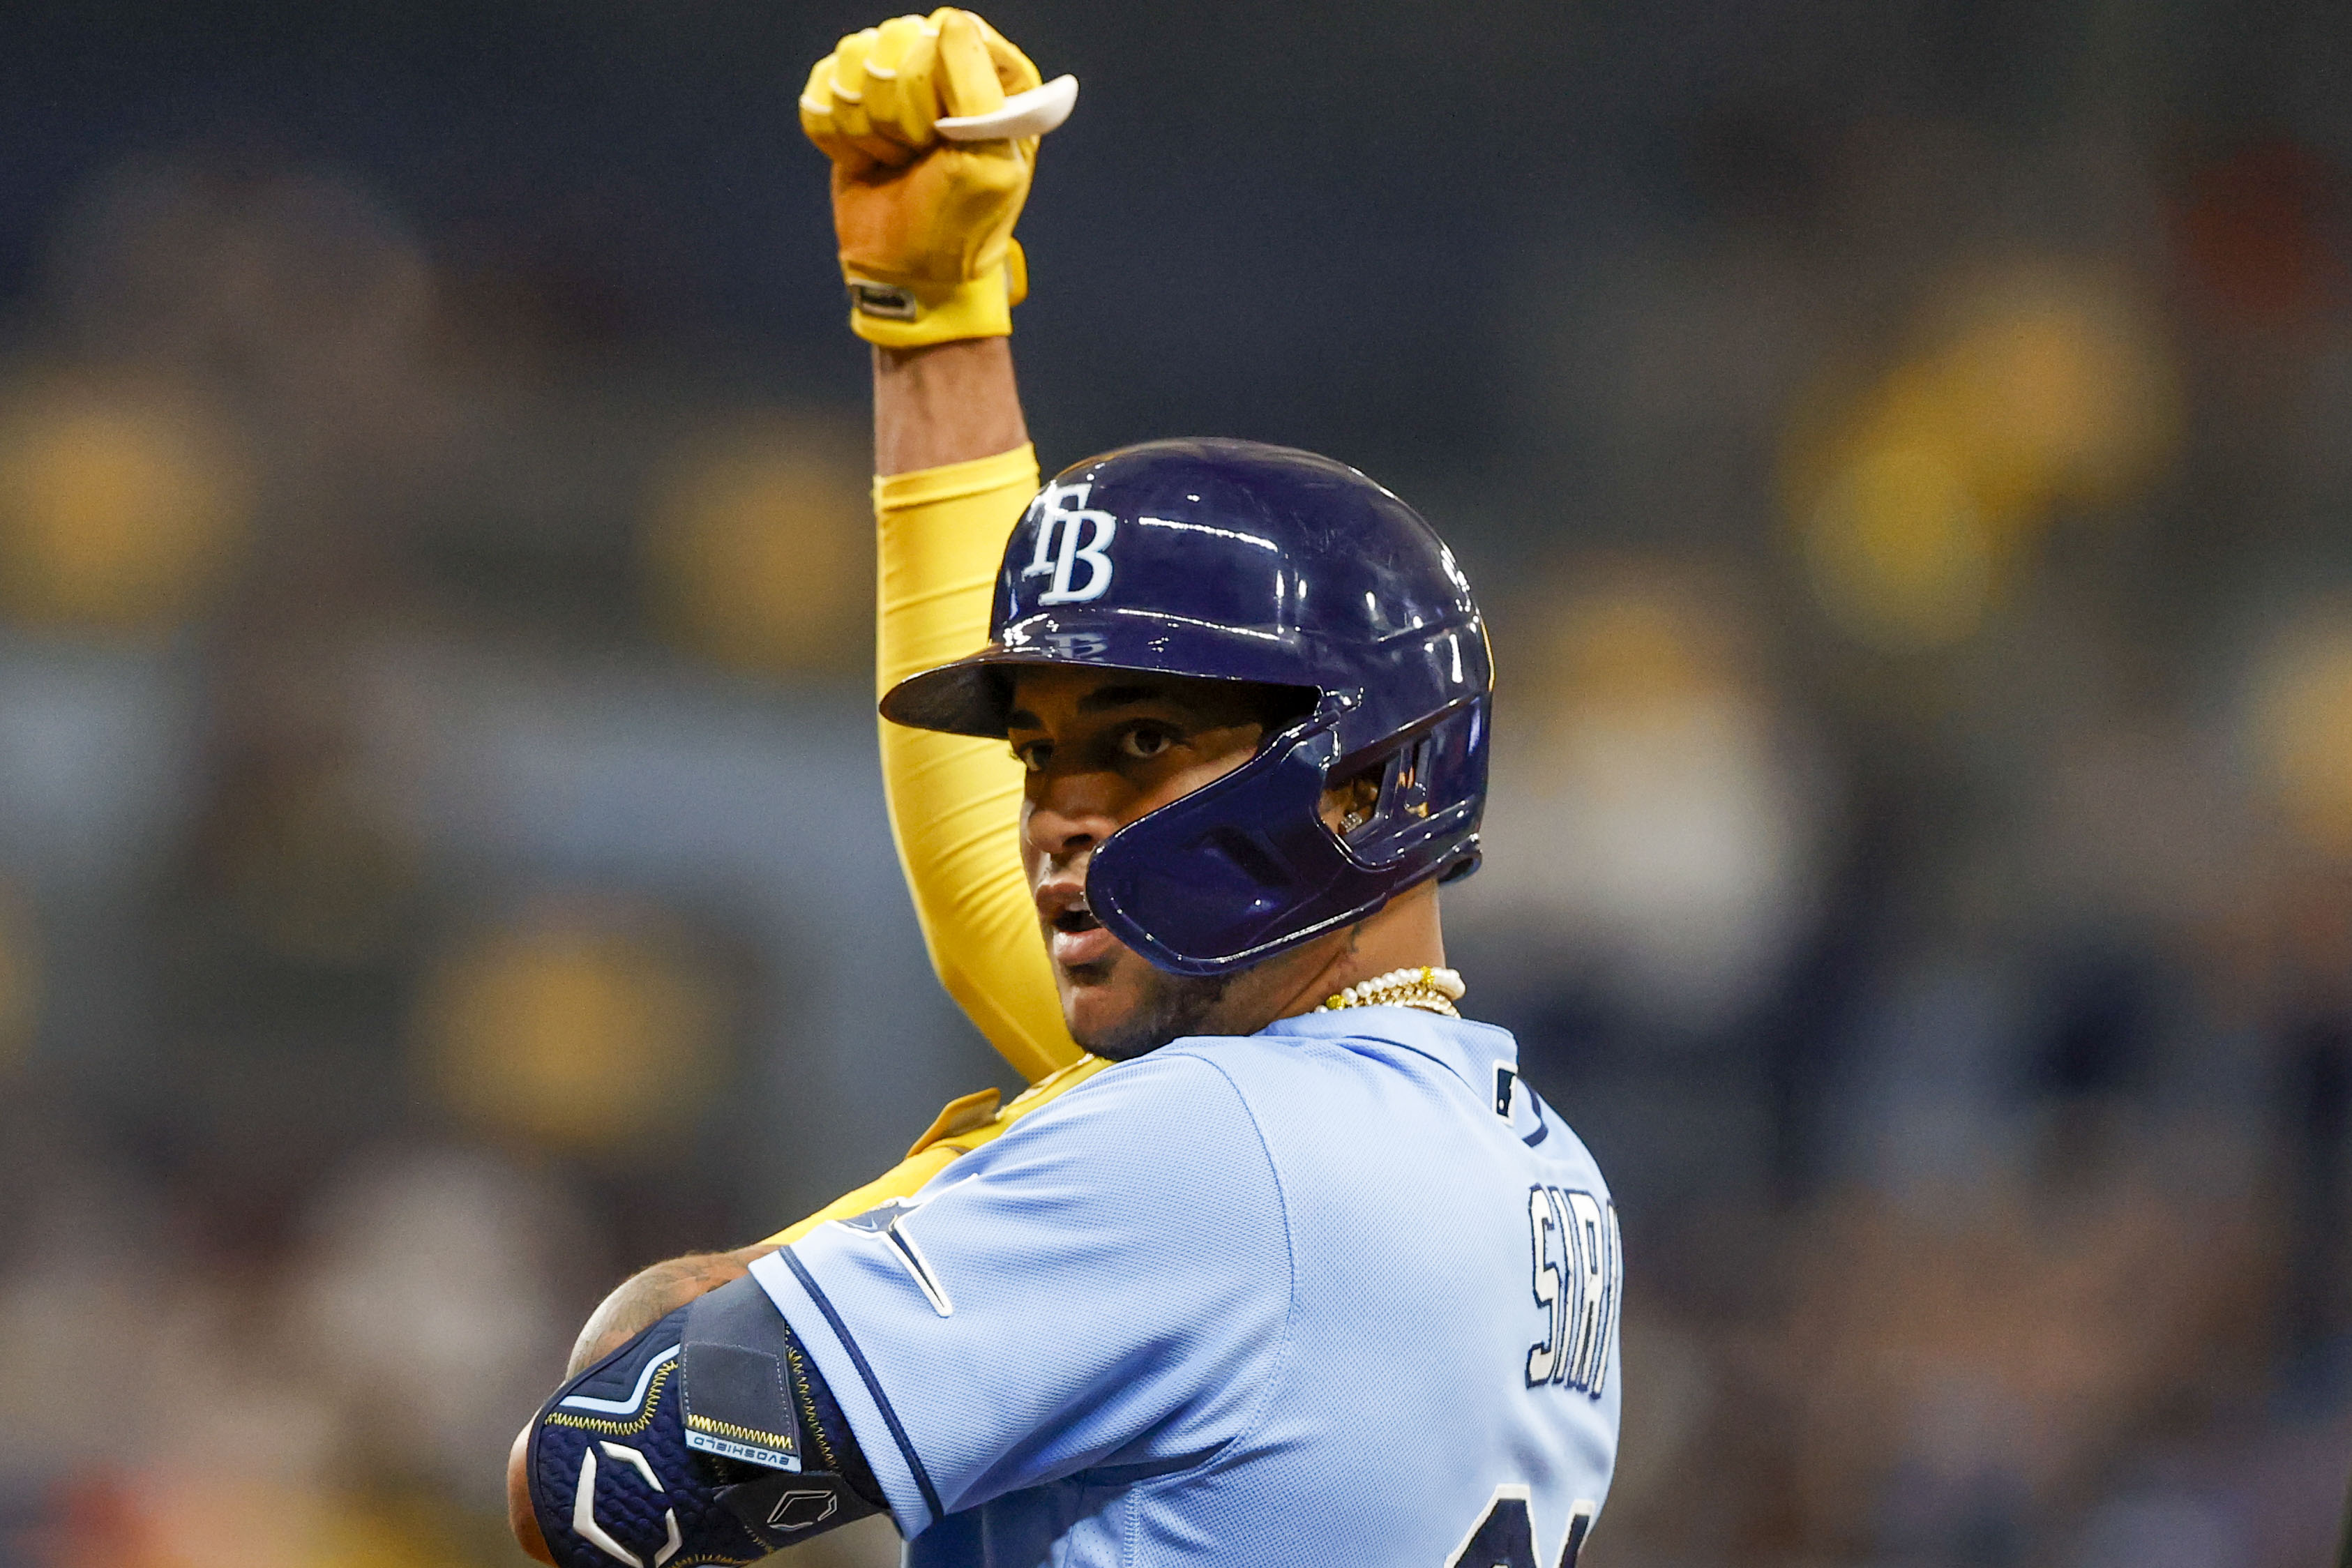 Jose Siri is missed by Astros, welcomed by Rays